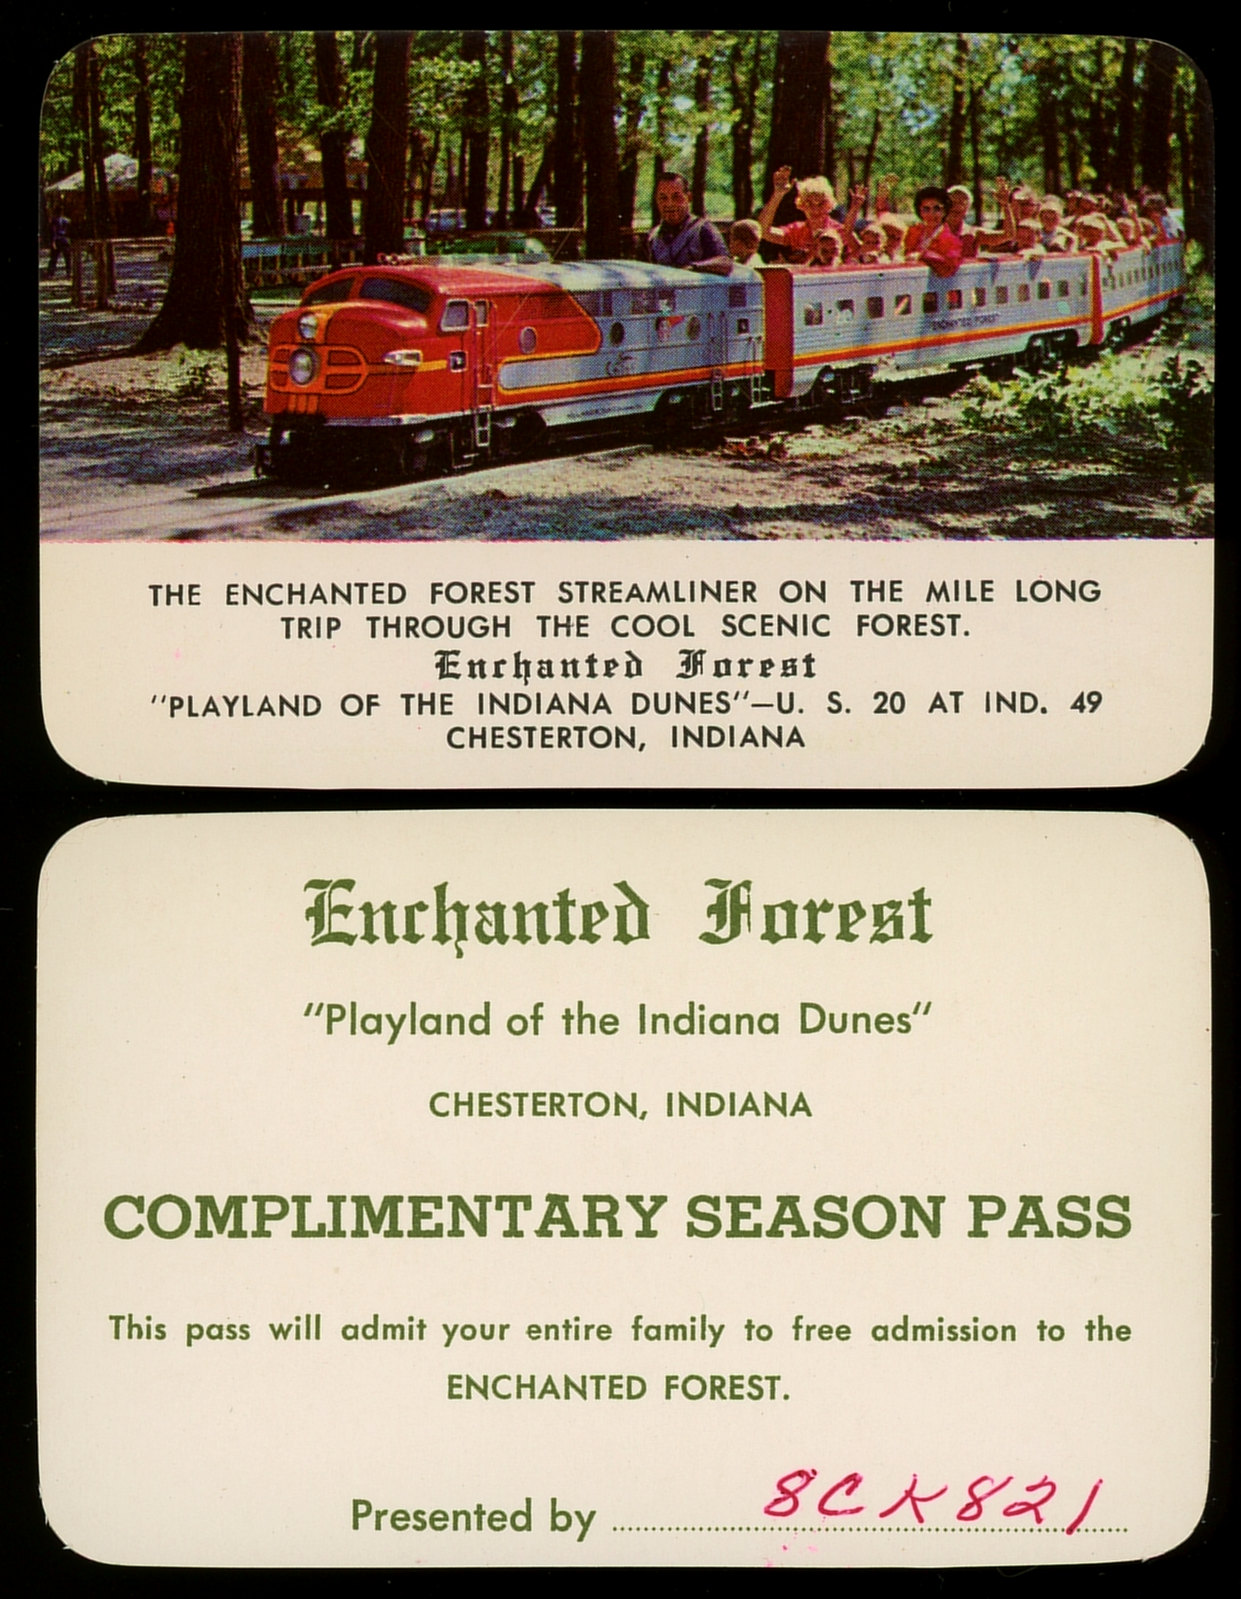 Enchanted Forest, Season Pass, 1958 - Chesterton, Indiana